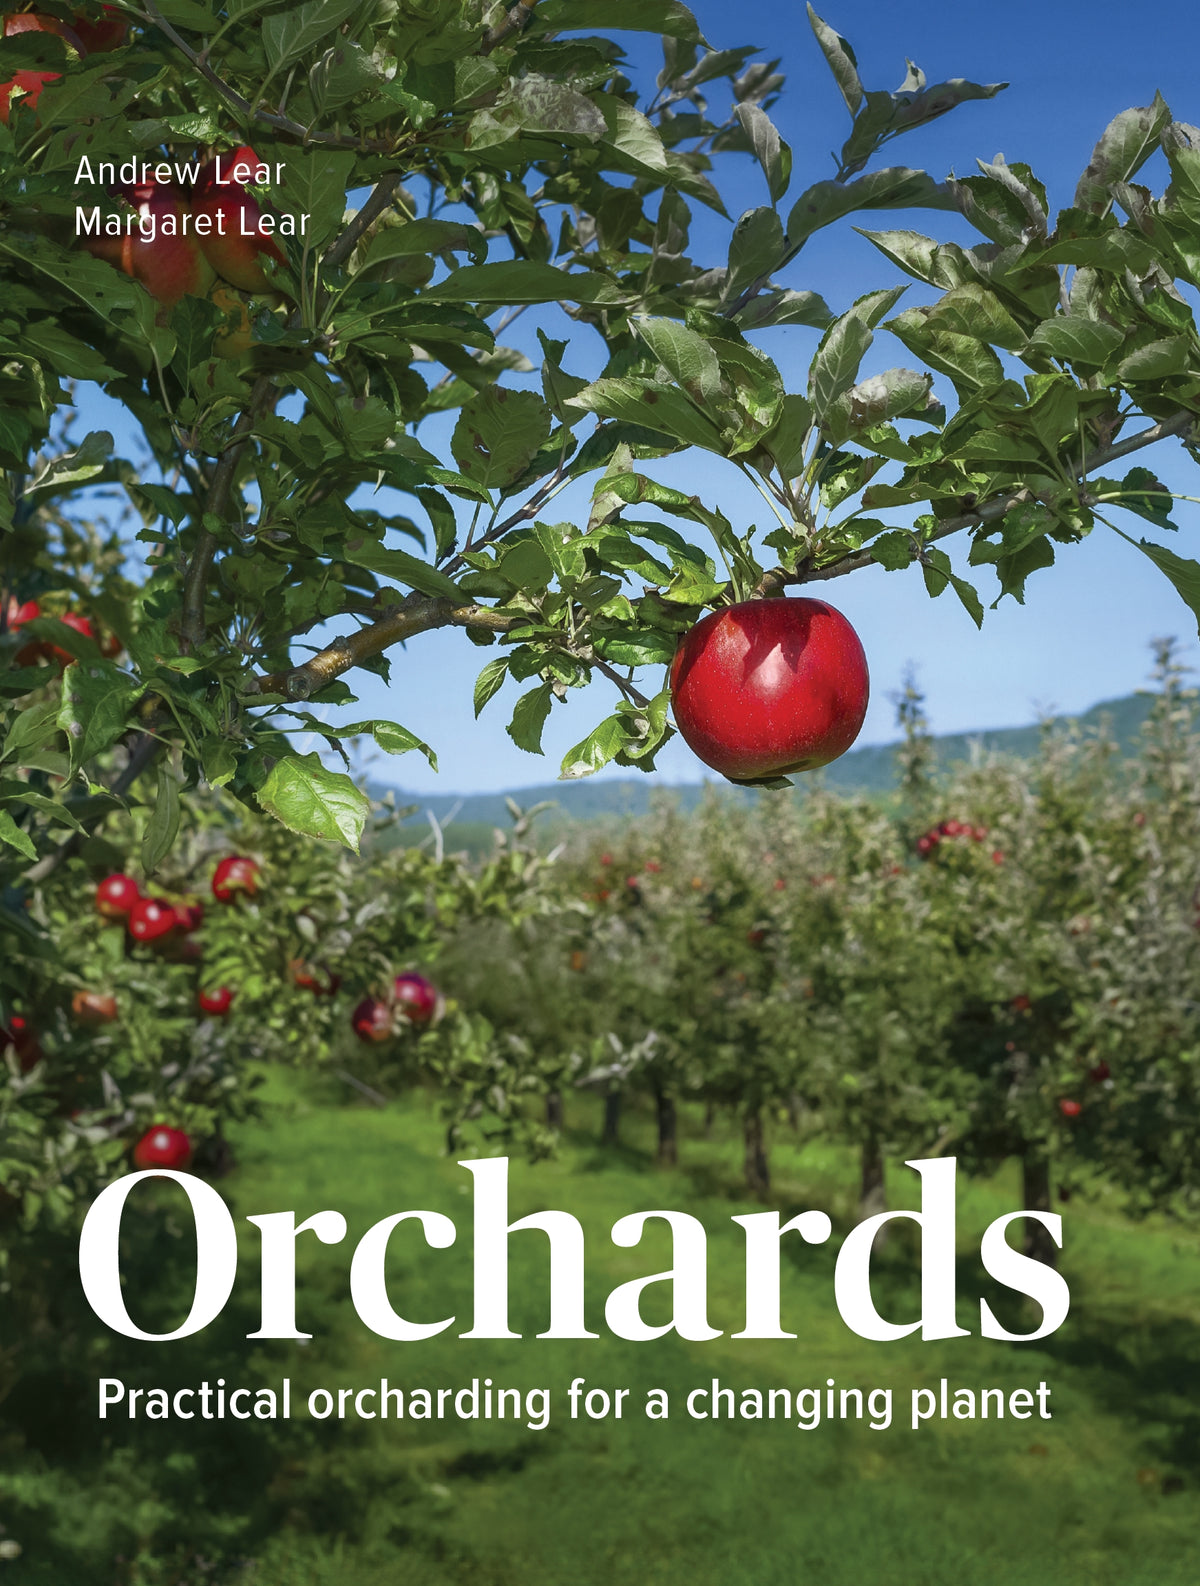 Orchards